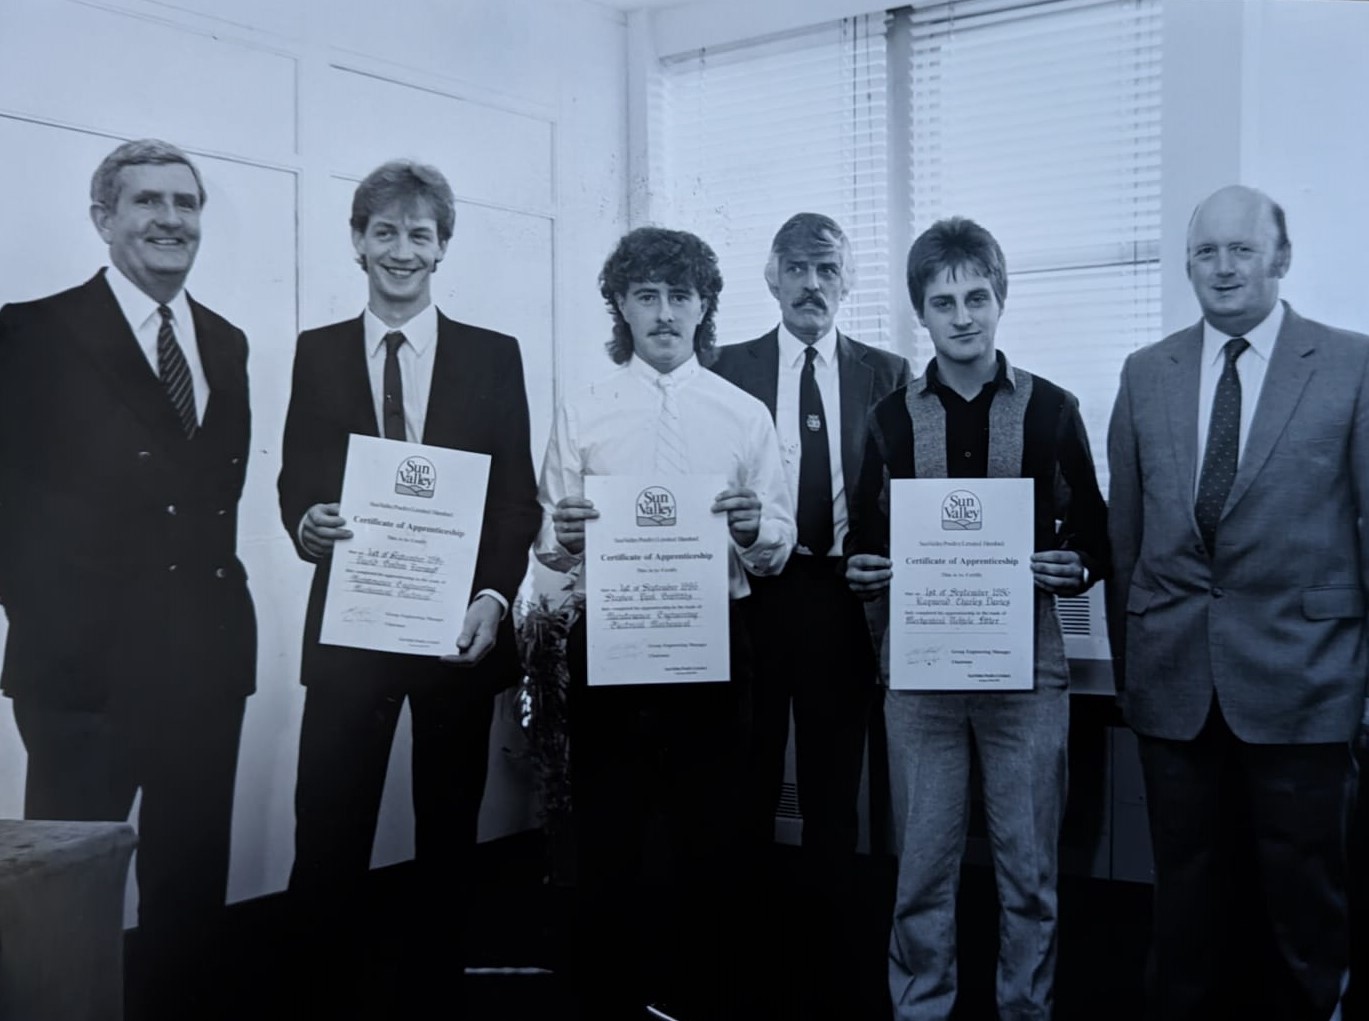 Sun Valley, 1986: Apprentices Tom Inglis, David Barnard, and Stephen Griffiths with safety and training manager Ron Aston and chief engineer Colin Clark